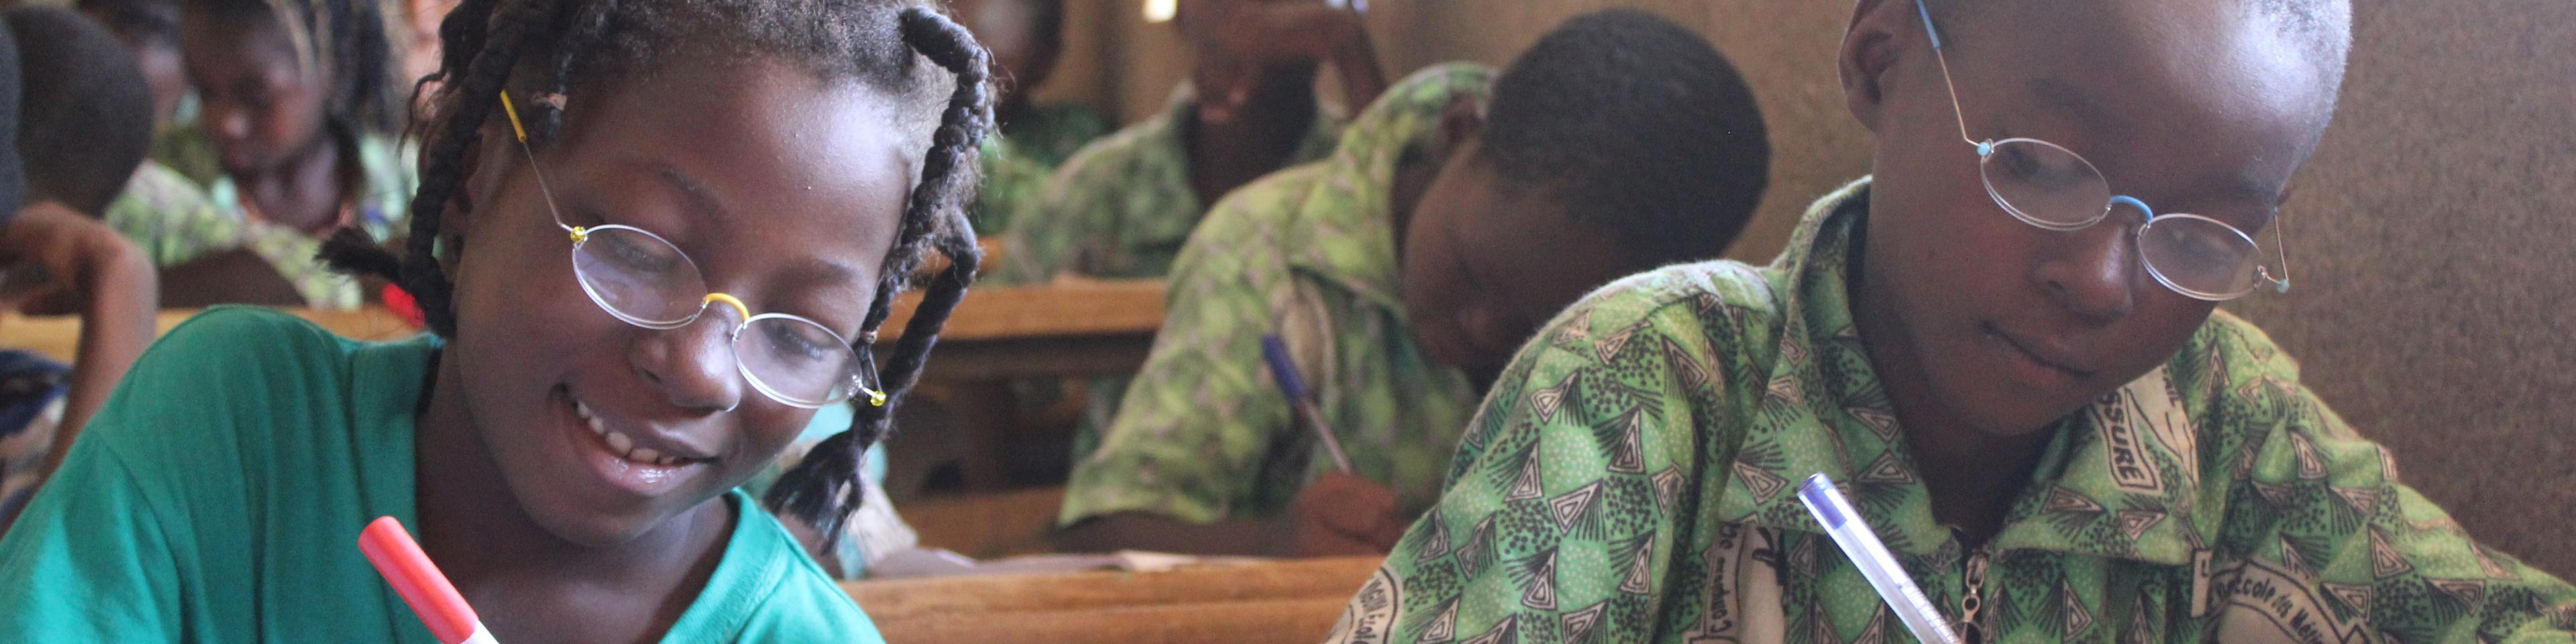 Pupils with OneDollarGlasses writing in the classroom